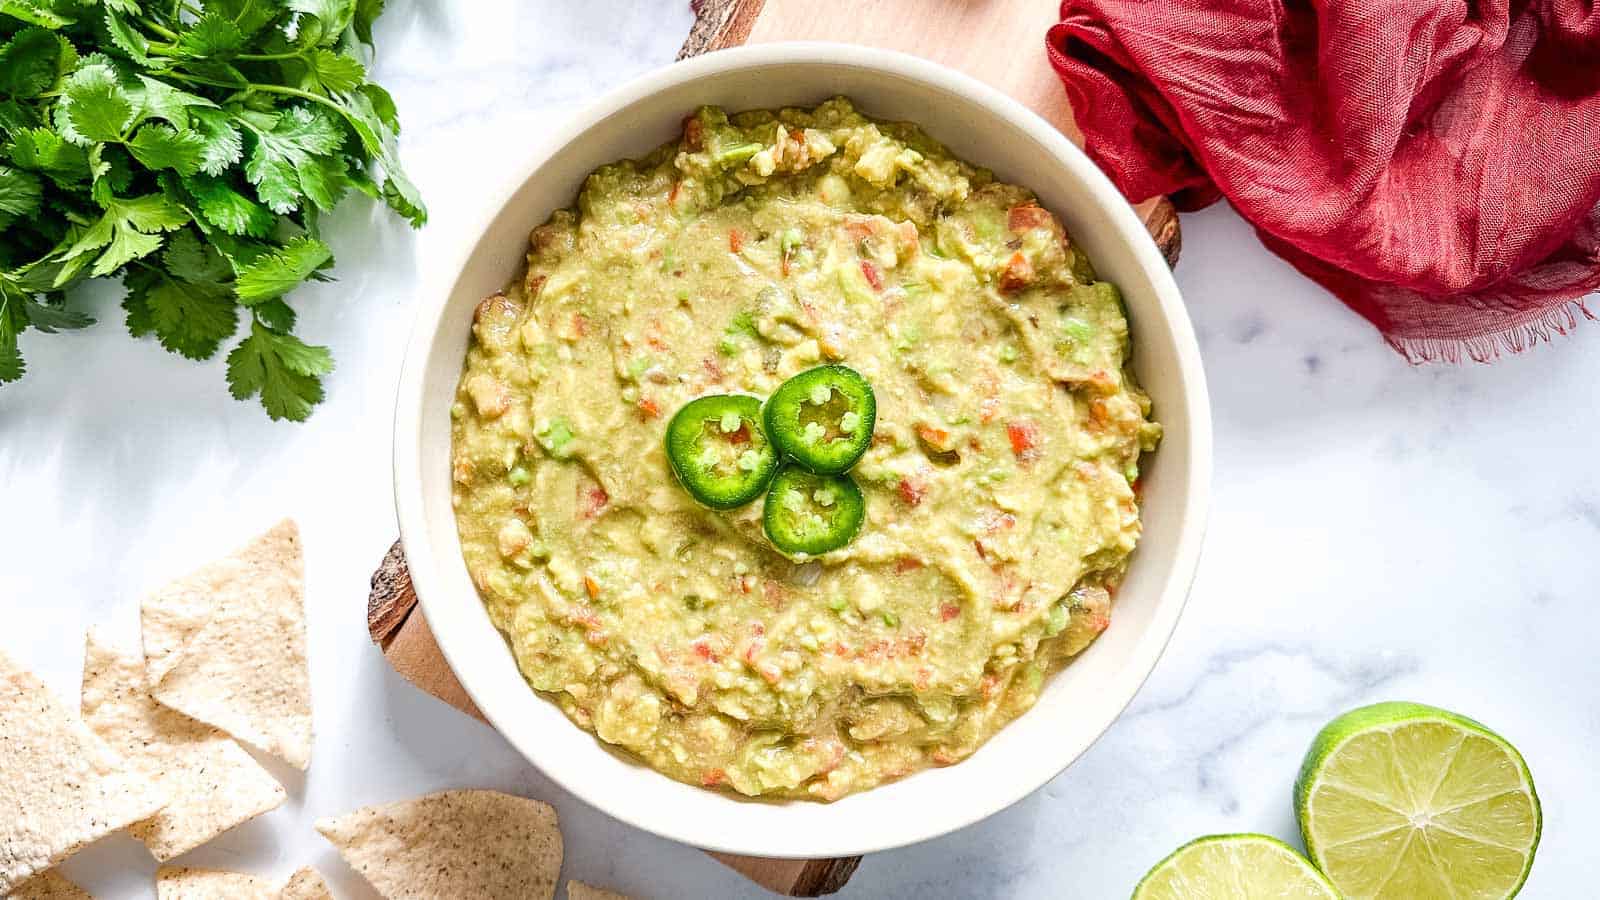 Guacamole in a bowl with tortilla chips.